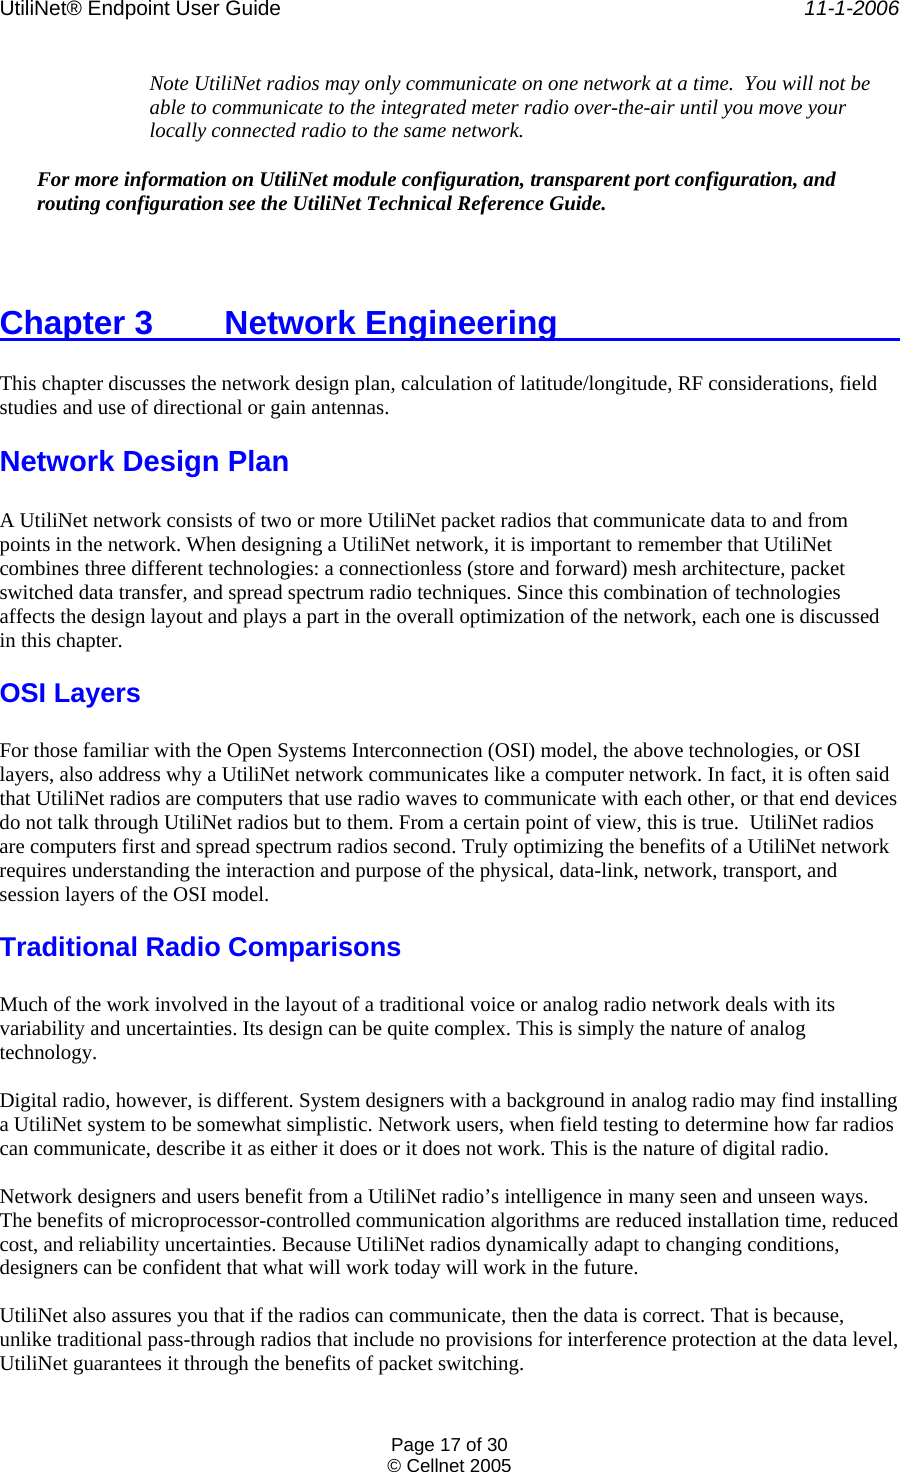 UtiliNet® Endpoint User Guide    11-1-2006 Page 17 of 30 © Cellnet 2005  Note UtiliNet radios may only communicate on one network at a time.  You will not be able to communicate to the integrated meter radio over-the-air until you move your locally connected radio to the same network.   For more information on UtiliNet module configuration, transparent port configuration, and routing configuration see the UtiliNet Technical Reference Guide.  Chapter 3   Network Engineering            This chapter discusses the network design plan, calculation of latitude/longitude, RF considerations, field studies and use of directional or gain antennas. Network Design Plan  A UtiliNet network consists of two or more UtiliNet packet radios that communicate data to and from points in the network. When designing a UtiliNet network, it is important to remember that UtiliNet combines three different technologies: a connectionless (store and forward) mesh architecture, packet switched data transfer, and spread spectrum radio techniques. Since this combination of technologies affects the design layout and plays a part in the overall optimization of the network, each one is discussed in this chapter. OSI Layers  For those familiar with the Open Systems Interconnection (OSI) model, the above technologies, or OSI layers, also address why a UtiliNet network communicates like a computer network. In fact, it is often said that UtiliNet radios are computers that use radio waves to communicate with each other, or that end devices do not talk through UtiliNet radios but to them. From a certain point of view, this is true.  UtiliNet radios are computers first and spread spectrum radios second. Truly optimizing the benefits of a UtiliNet network requires understanding the interaction and purpose of the physical, data-link, network, transport, and session layers of the OSI model. Traditional Radio Comparisons  Much of the work involved in the layout of a traditional voice or analog radio network deals with its variability and uncertainties. Its design can be quite complex. This is simply the nature of analog technology.  Digital radio, however, is different. System designers with a background in analog radio may find installing a UtiliNet system to be somewhat simplistic. Network users, when field testing to determine how far radios can communicate, describe it as either it does or it does not work. This is the nature of digital radio.  Network designers and users benefit from a UtiliNet radio’s intelligence in many seen and unseen ways. The benefits of microprocessor-controlled communication algorithms are reduced installation time, reduced cost, and reliability uncertainties. Because UtiliNet radios dynamically adapt to changing conditions, designers can be confident that what will work today will work in the future.  UtiliNet also assures you that if the radios can communicate, then the data is correct. That is because, unlike traditional pass-through radios that include no provisions for interference protection at the data level, UtiliNet guarantees it through the benefits of packet switching. 